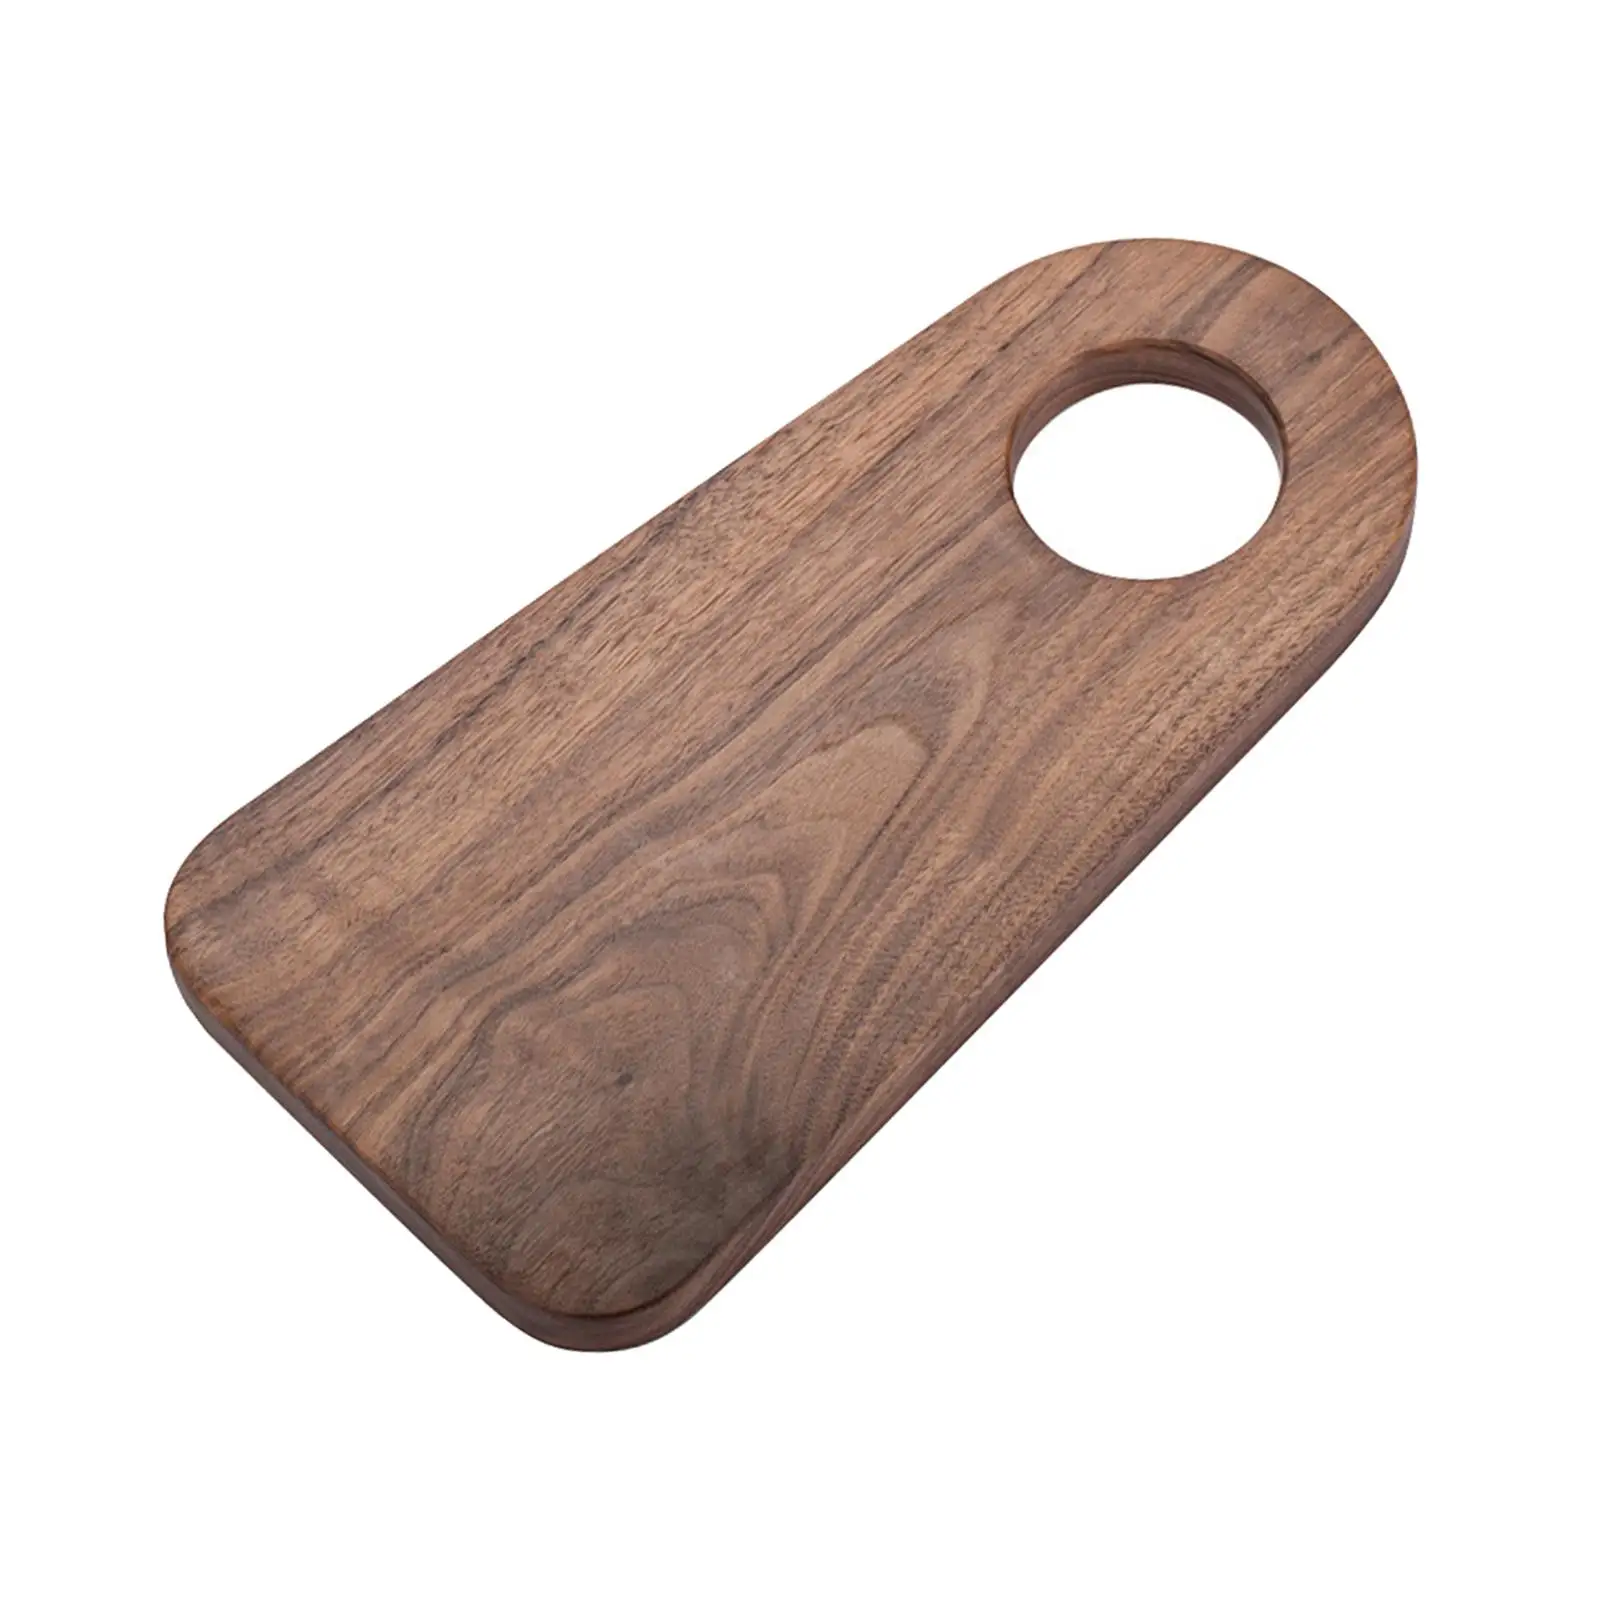 Wooden Chopping Board Kitchen Tools Bread Tray with Handle Serving Board Utensils Pizza Board Cutting Board for Steak Meat